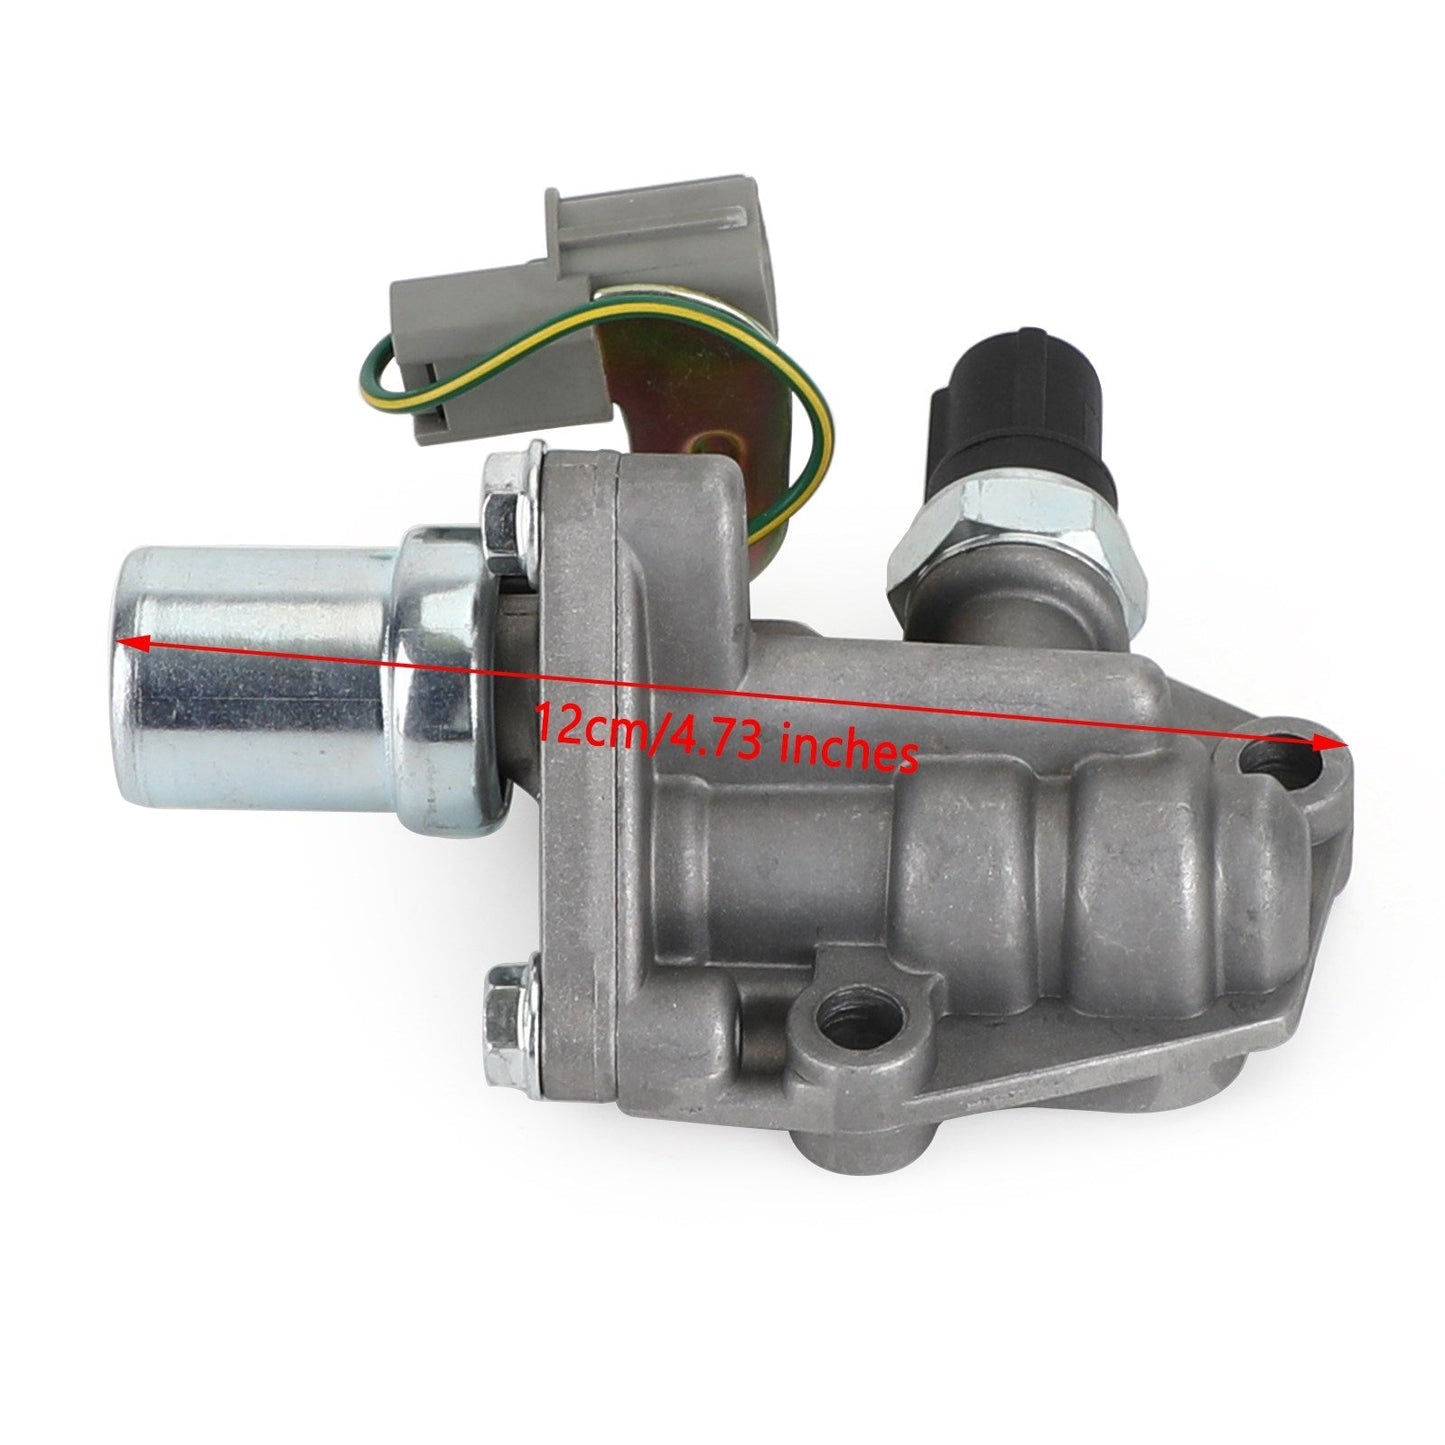 VTEC Solenoid Spool Valve 15810-PAA-A02 For Honda Accord 4 Cyl Odyssey 1998-2002